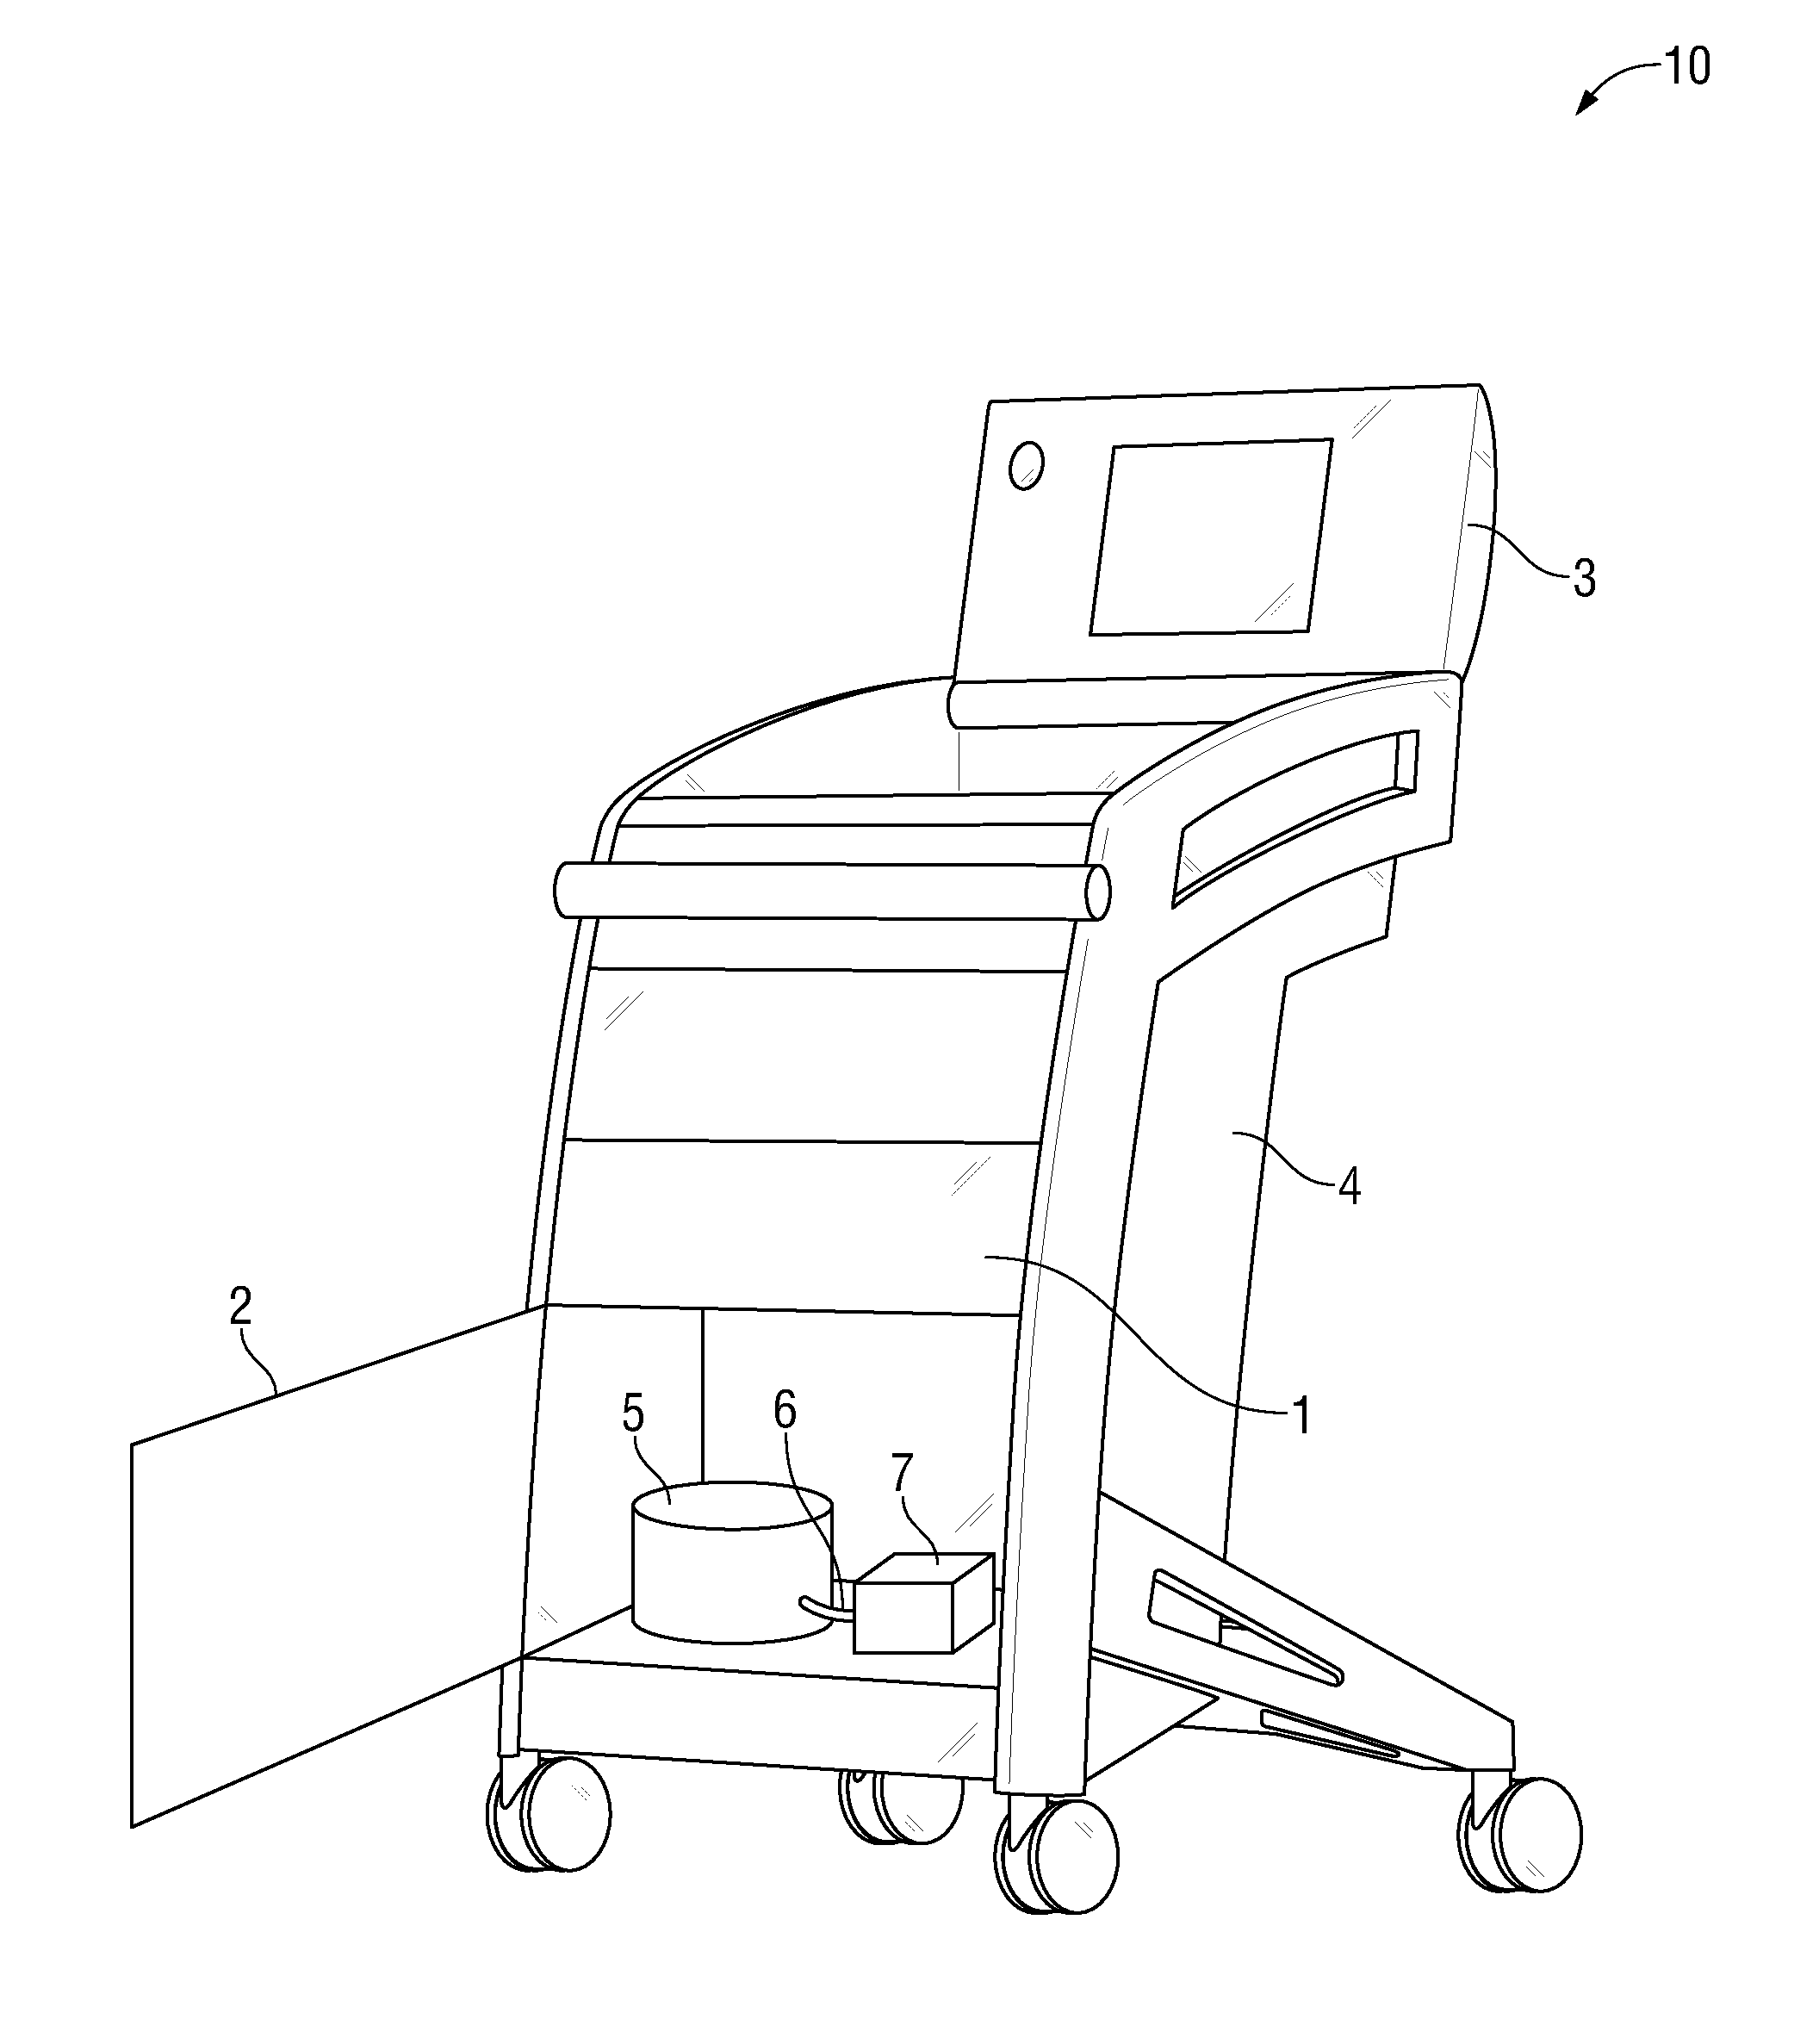 Automated work station for point-of-care cell and biological fluid processing